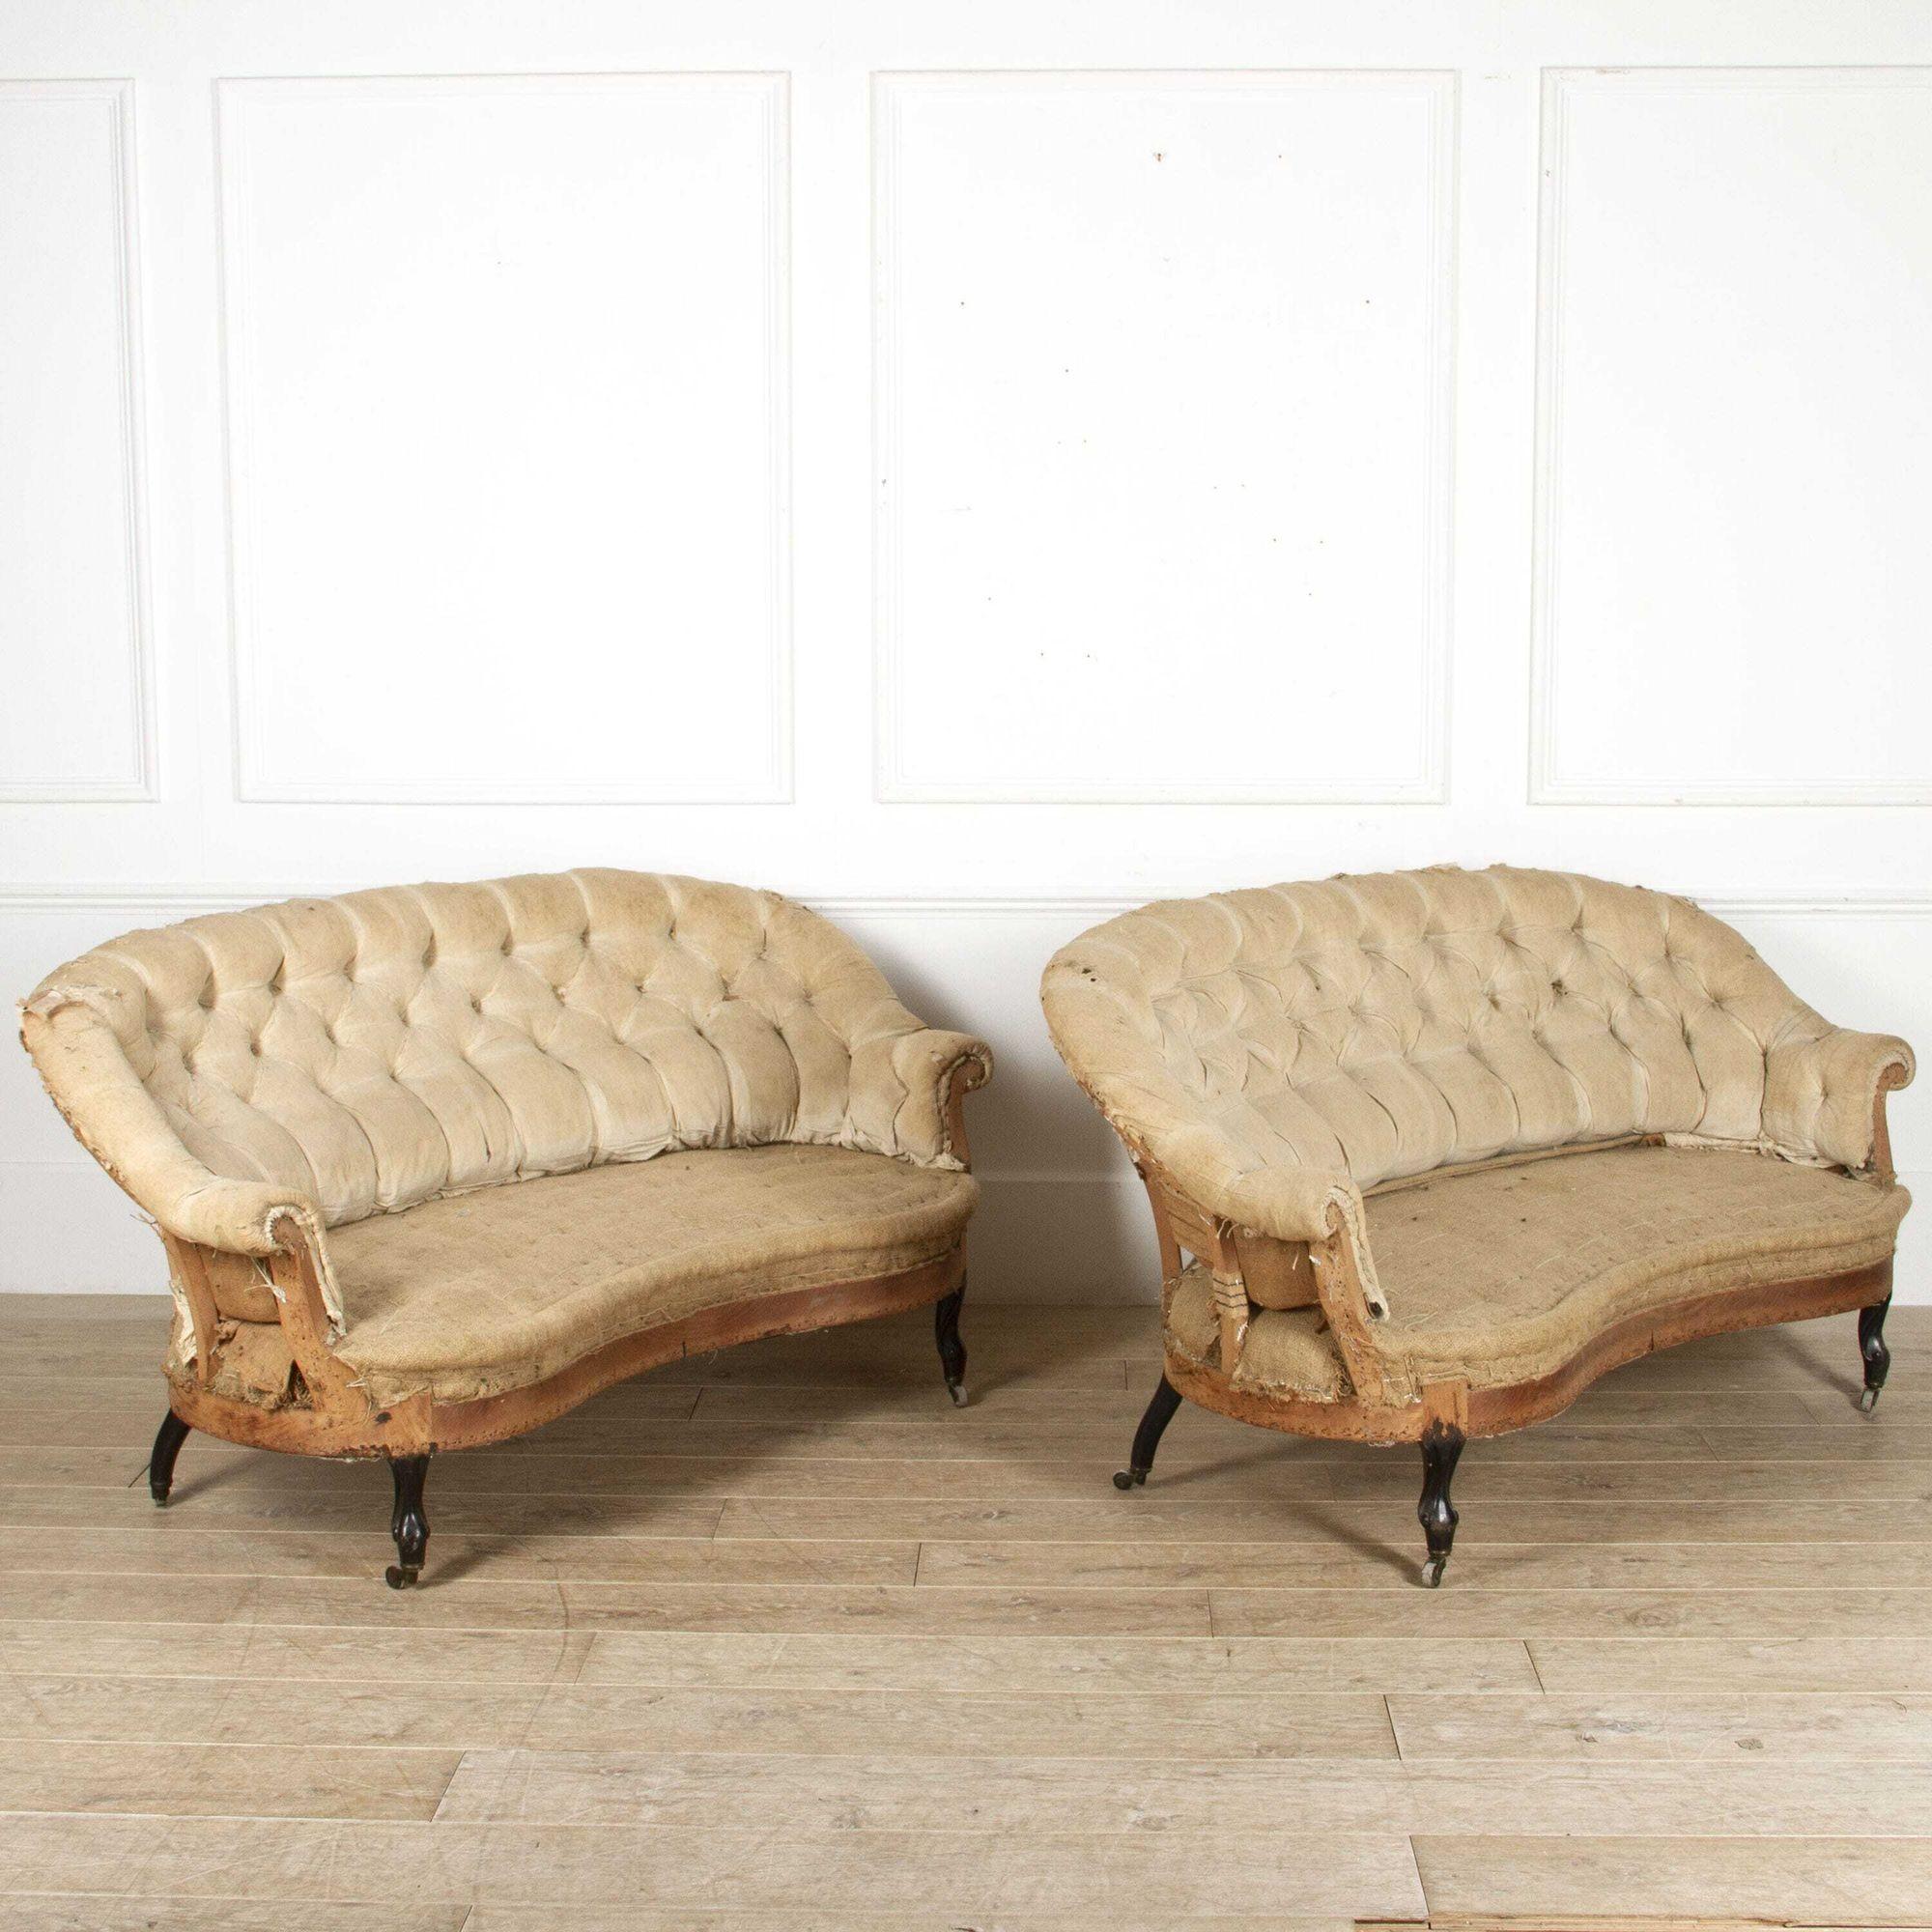 Stunning pair of French sofa's in the Napoleon III style, circa 1880.
These classic sofa's feature an elegantly shaped frame which includes their original button backs. 
They are both of great shape and size which improves their comfortability and